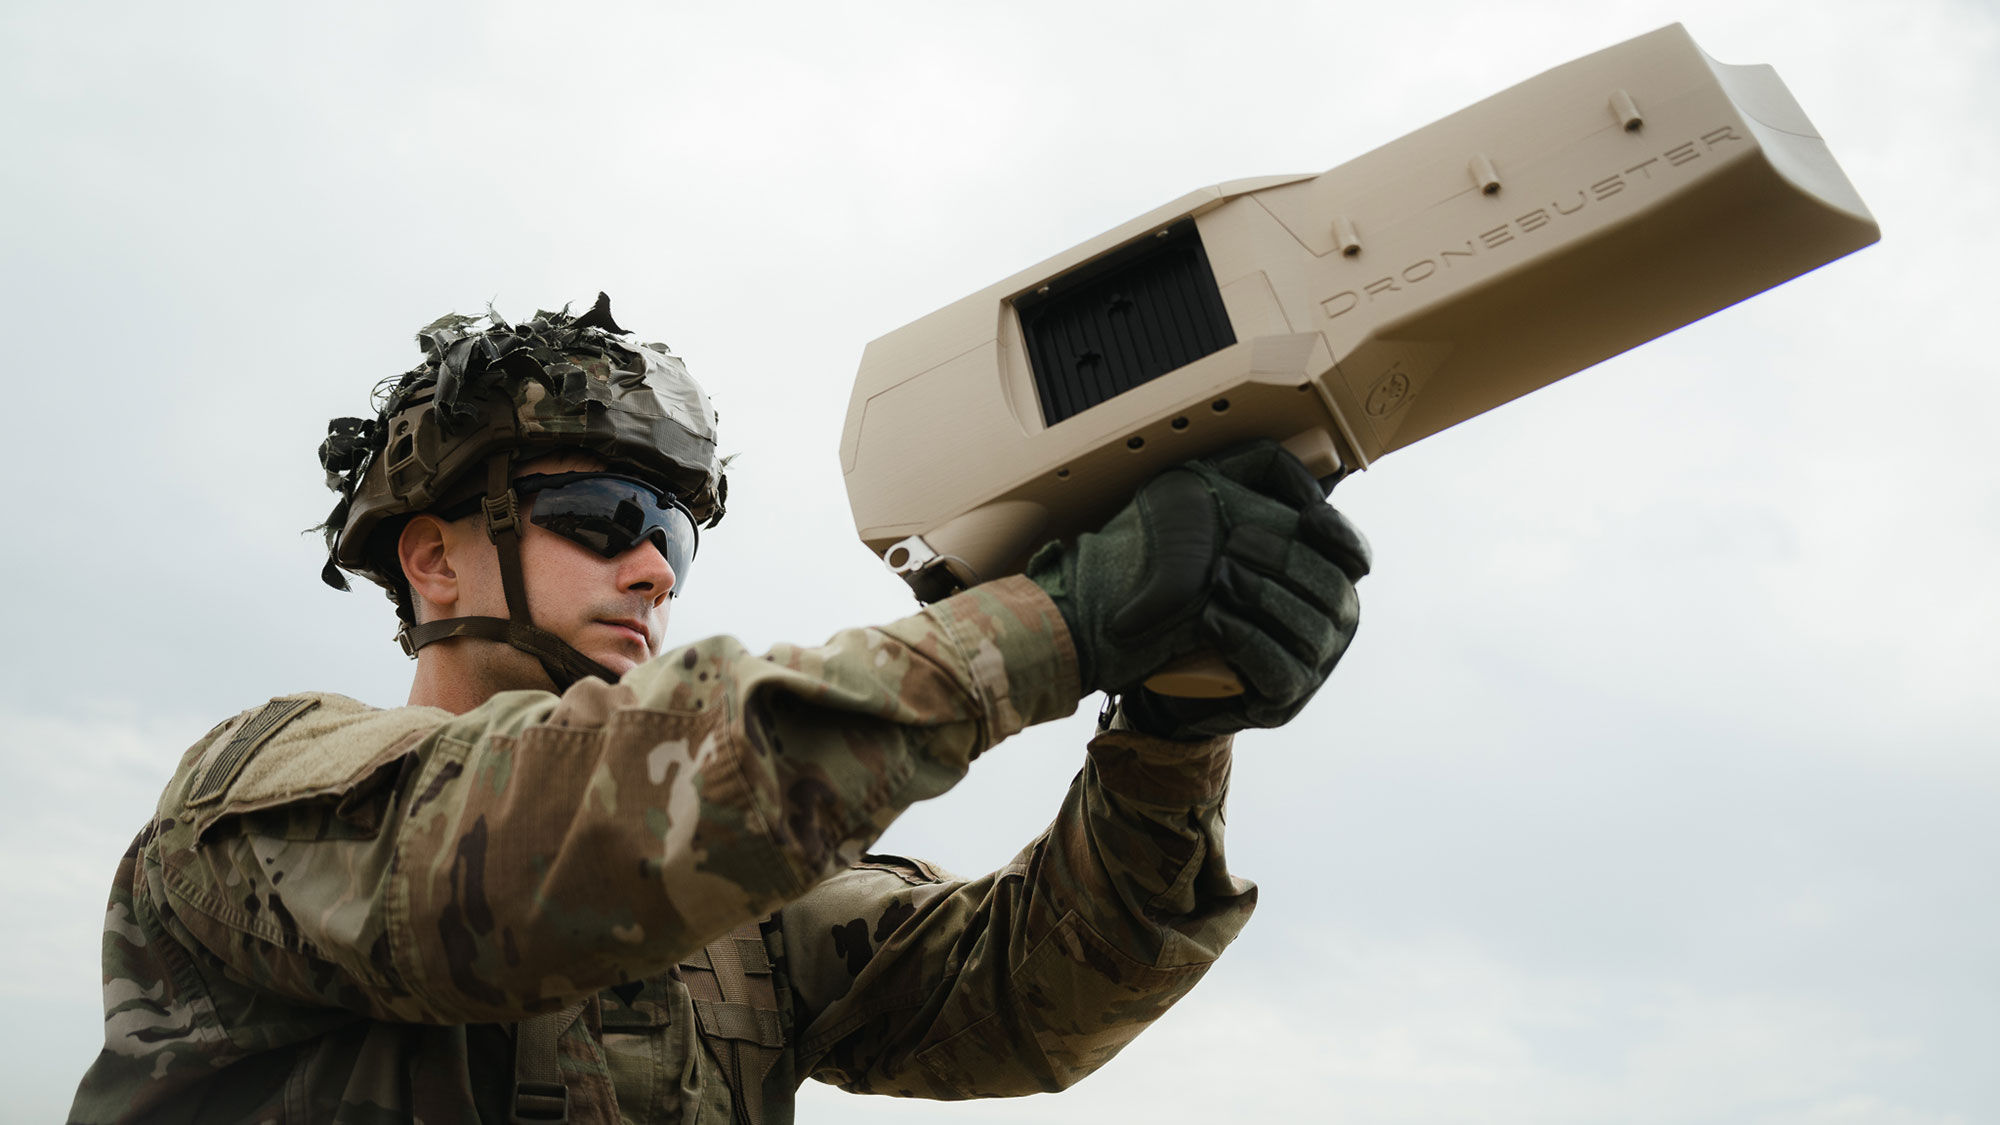 This US Army paratrooper is using a Dronebuster 3B in an April exercise in Croatia.